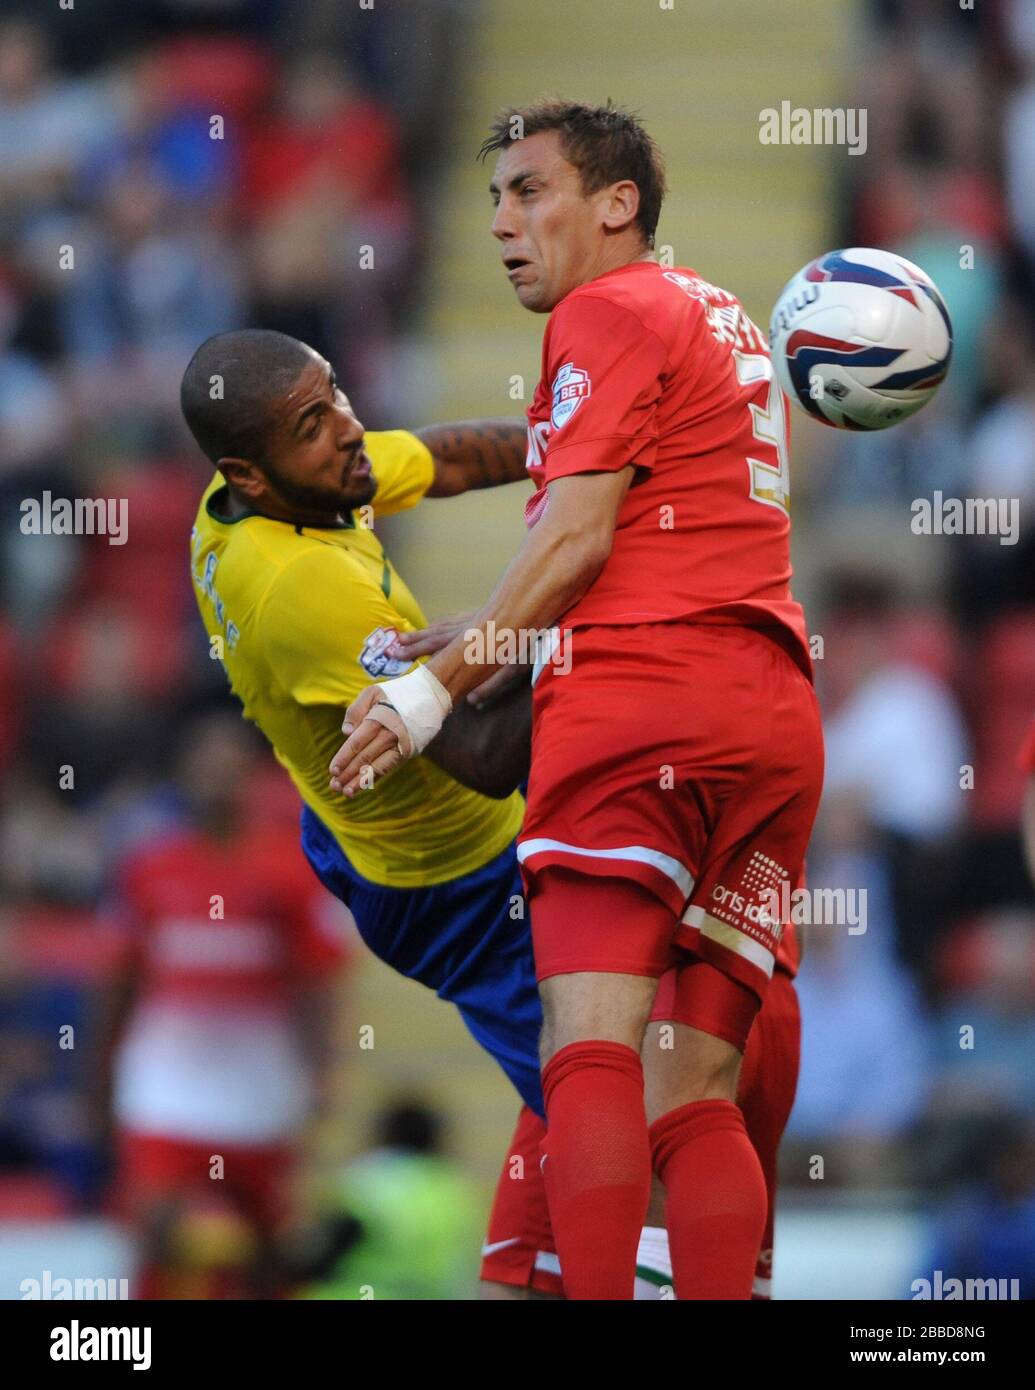 Leyton Orient's Gary Sawyer and Coventry City's Leon Clarke (left) battle for the ball in the air Stock Photo